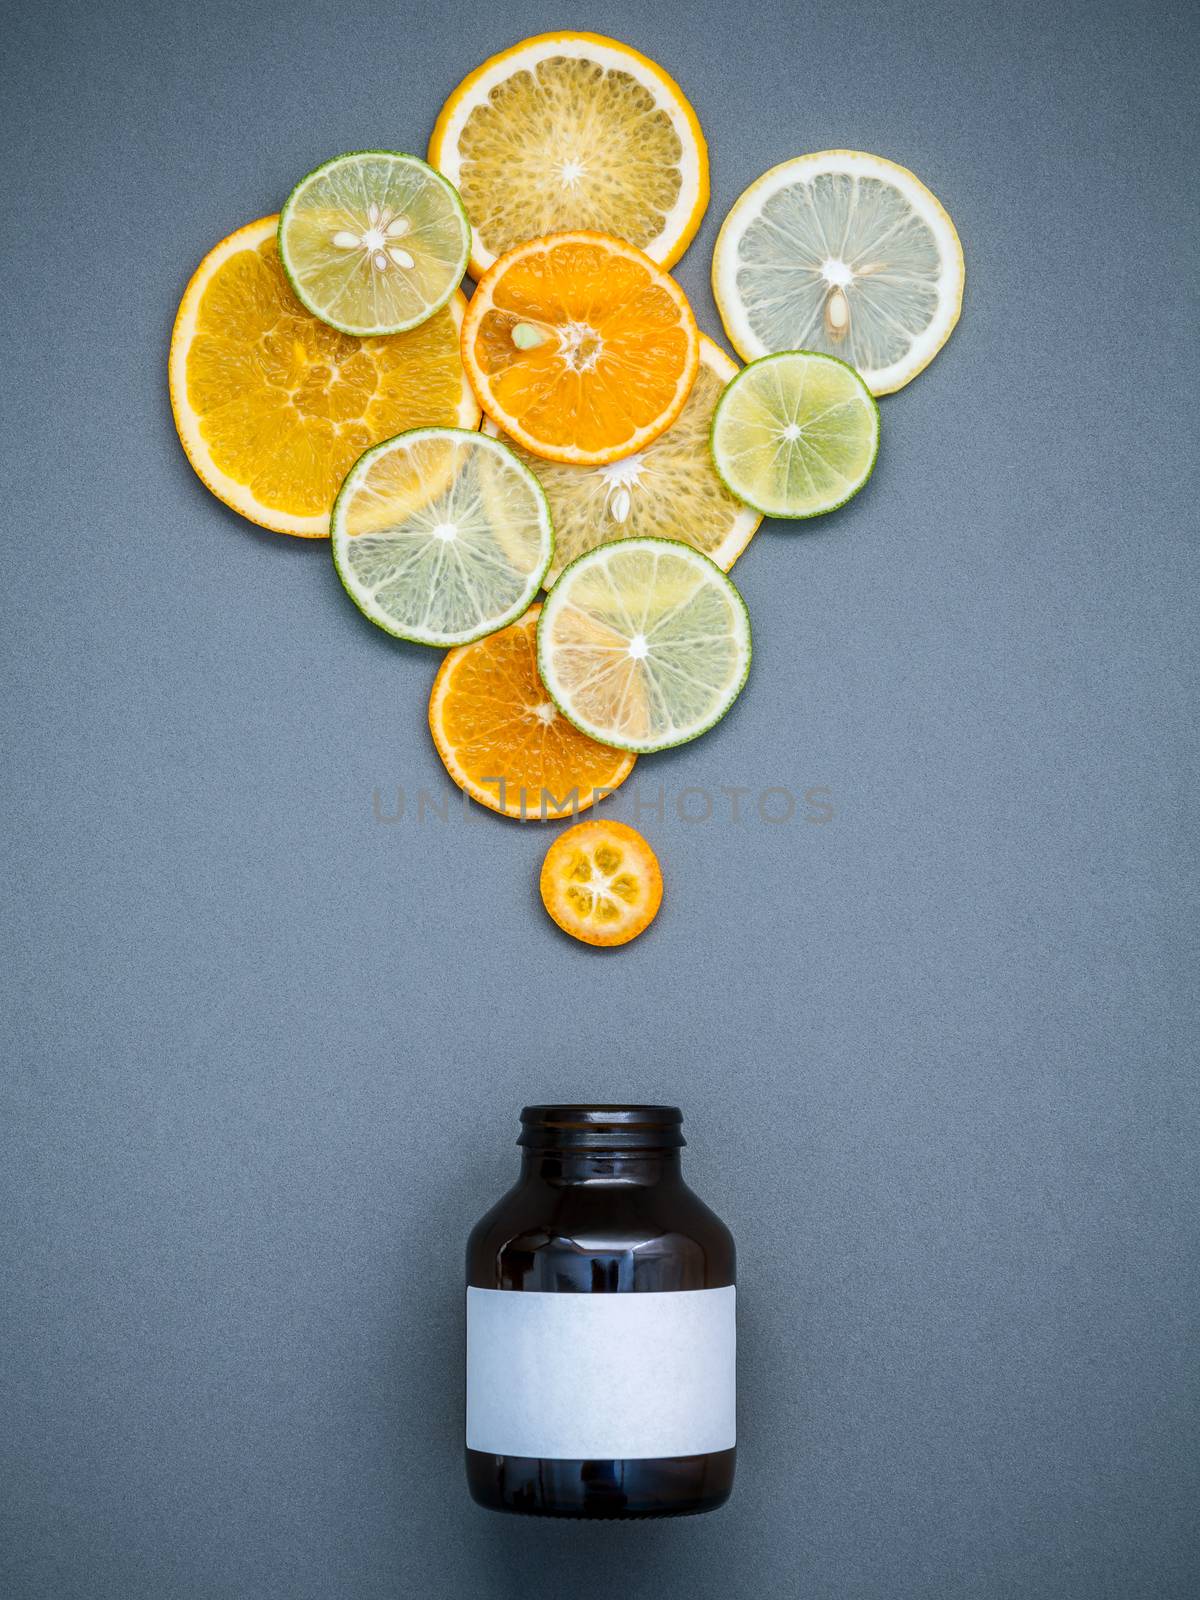 Healthy foods and medicine concept. Bottle of vitamin C and vari by kerdkanno